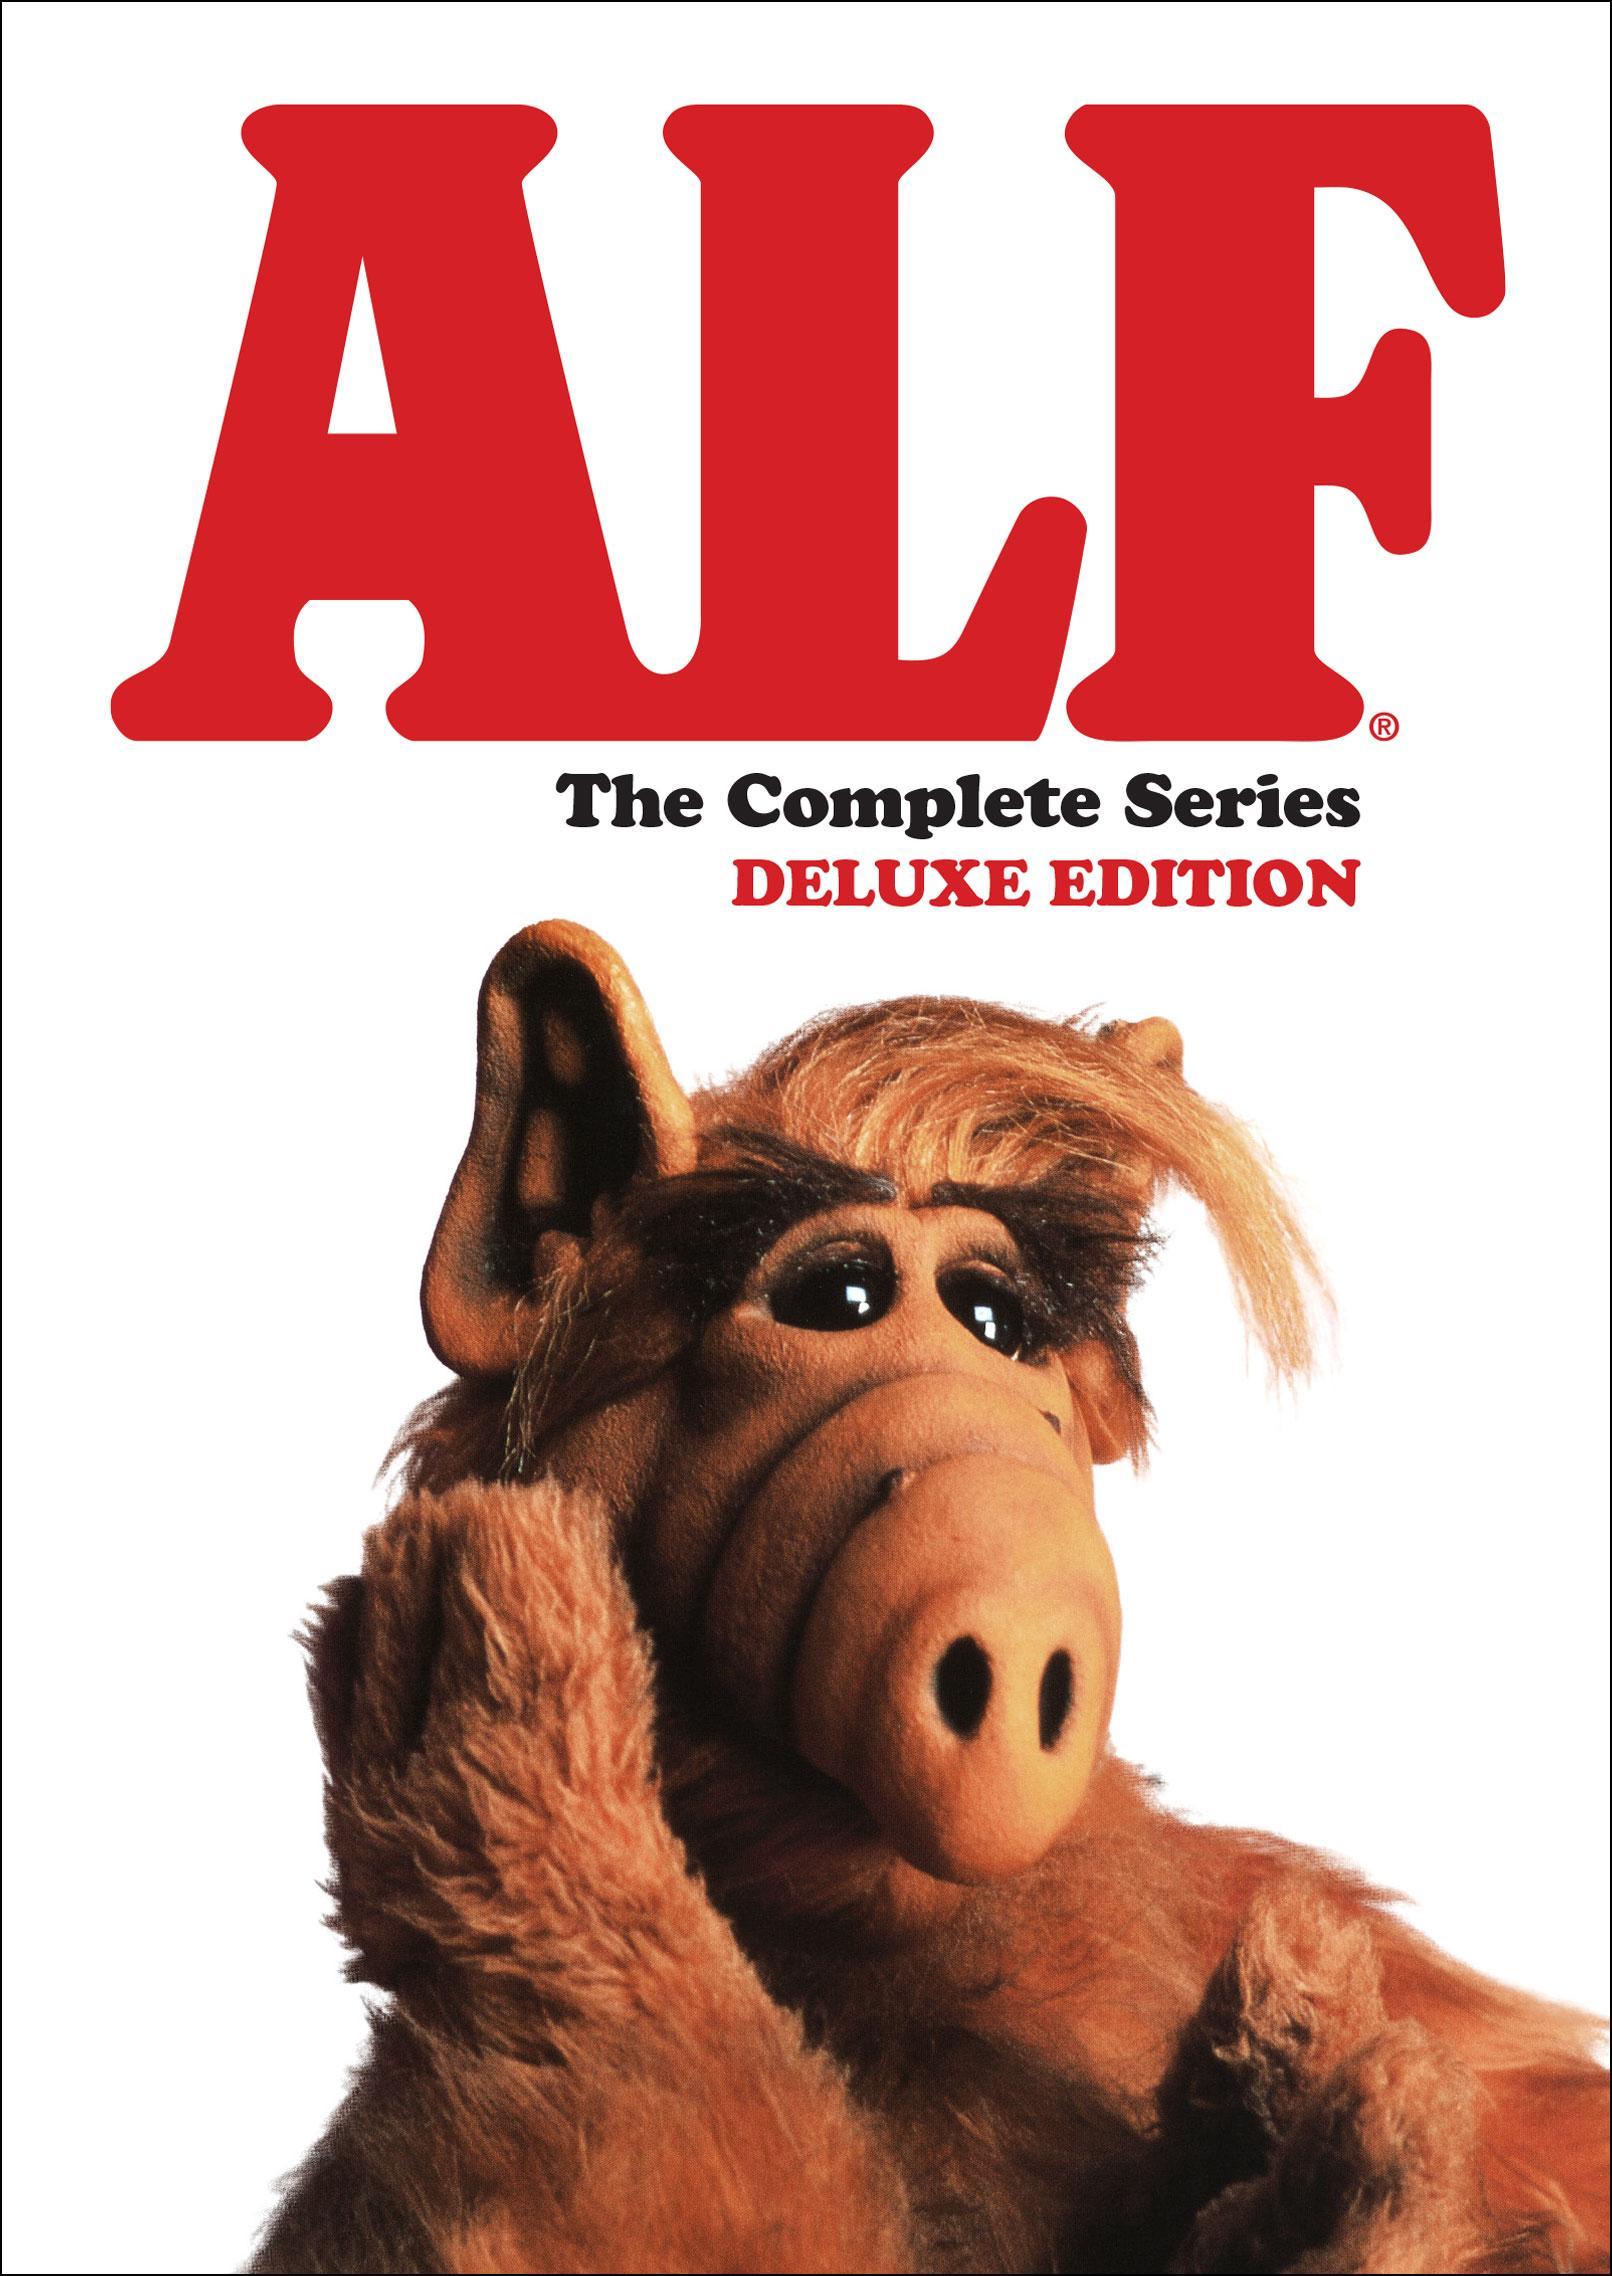 ALF: The Complete Series (Deluxe Edition) (DVD) - image 1 of 3